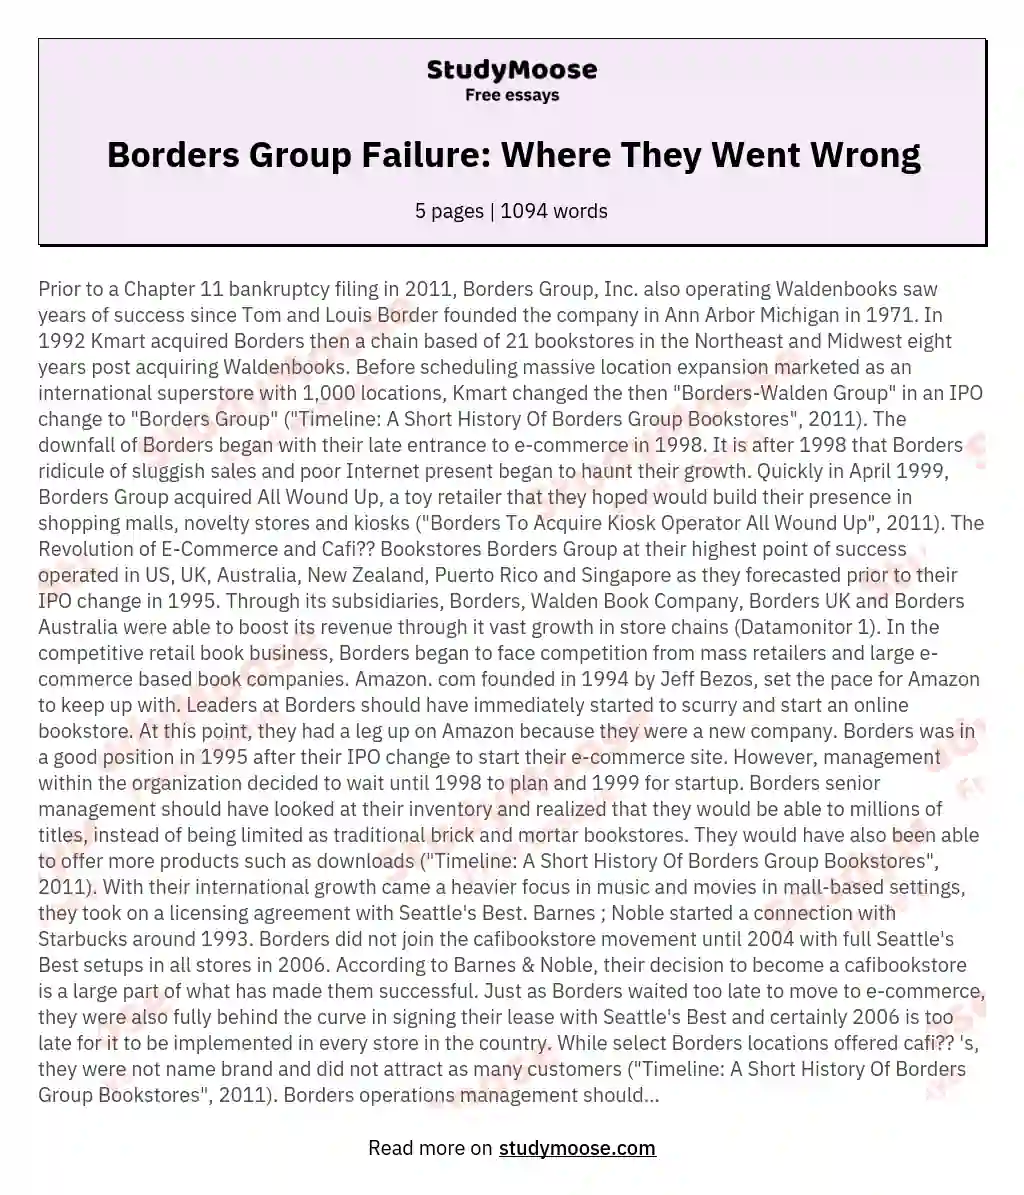 Borders Group Failure: Where They Went Wrong essay